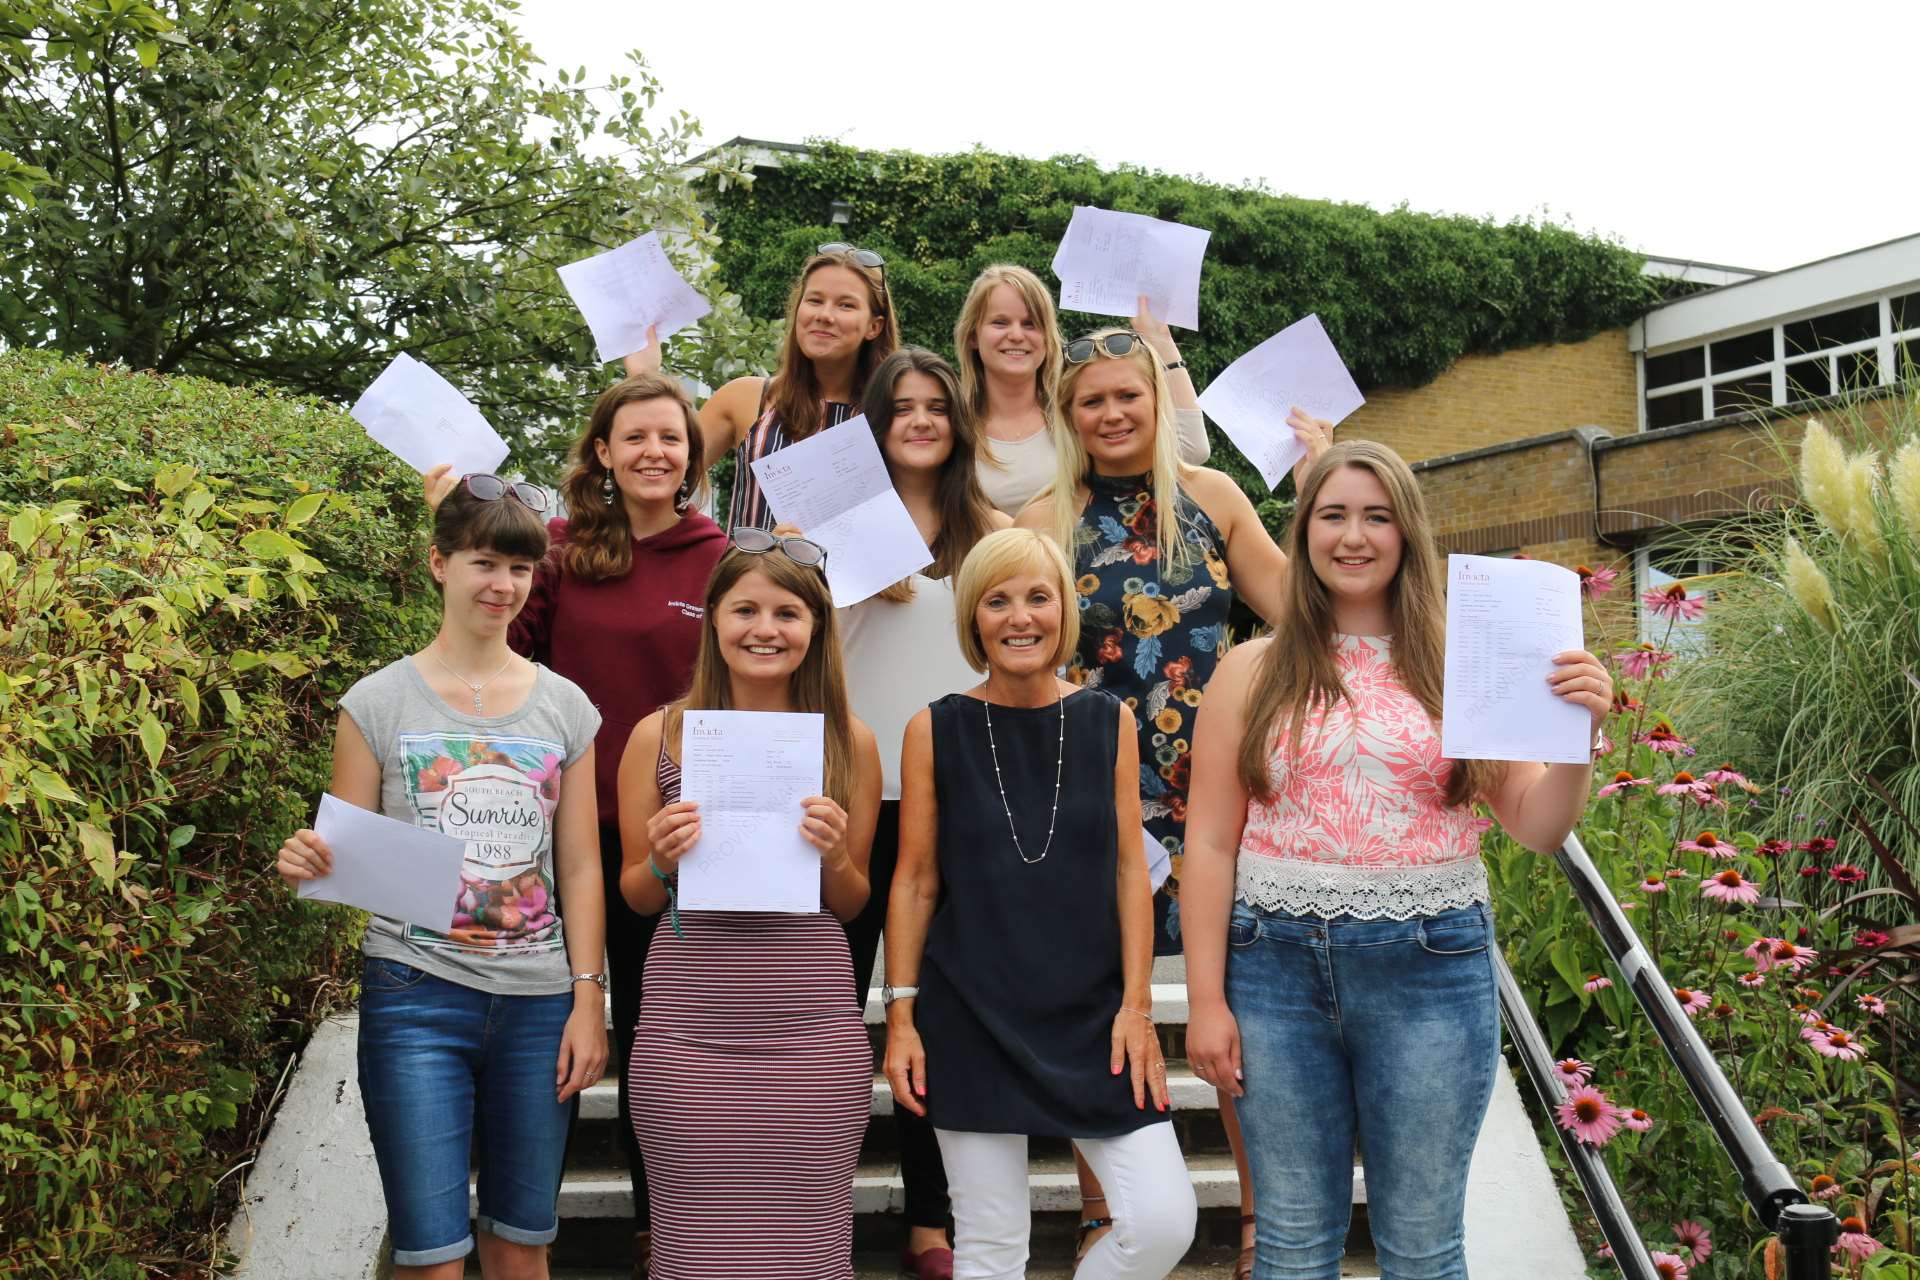 Alevel results for students at schools in Maidstone, Malling